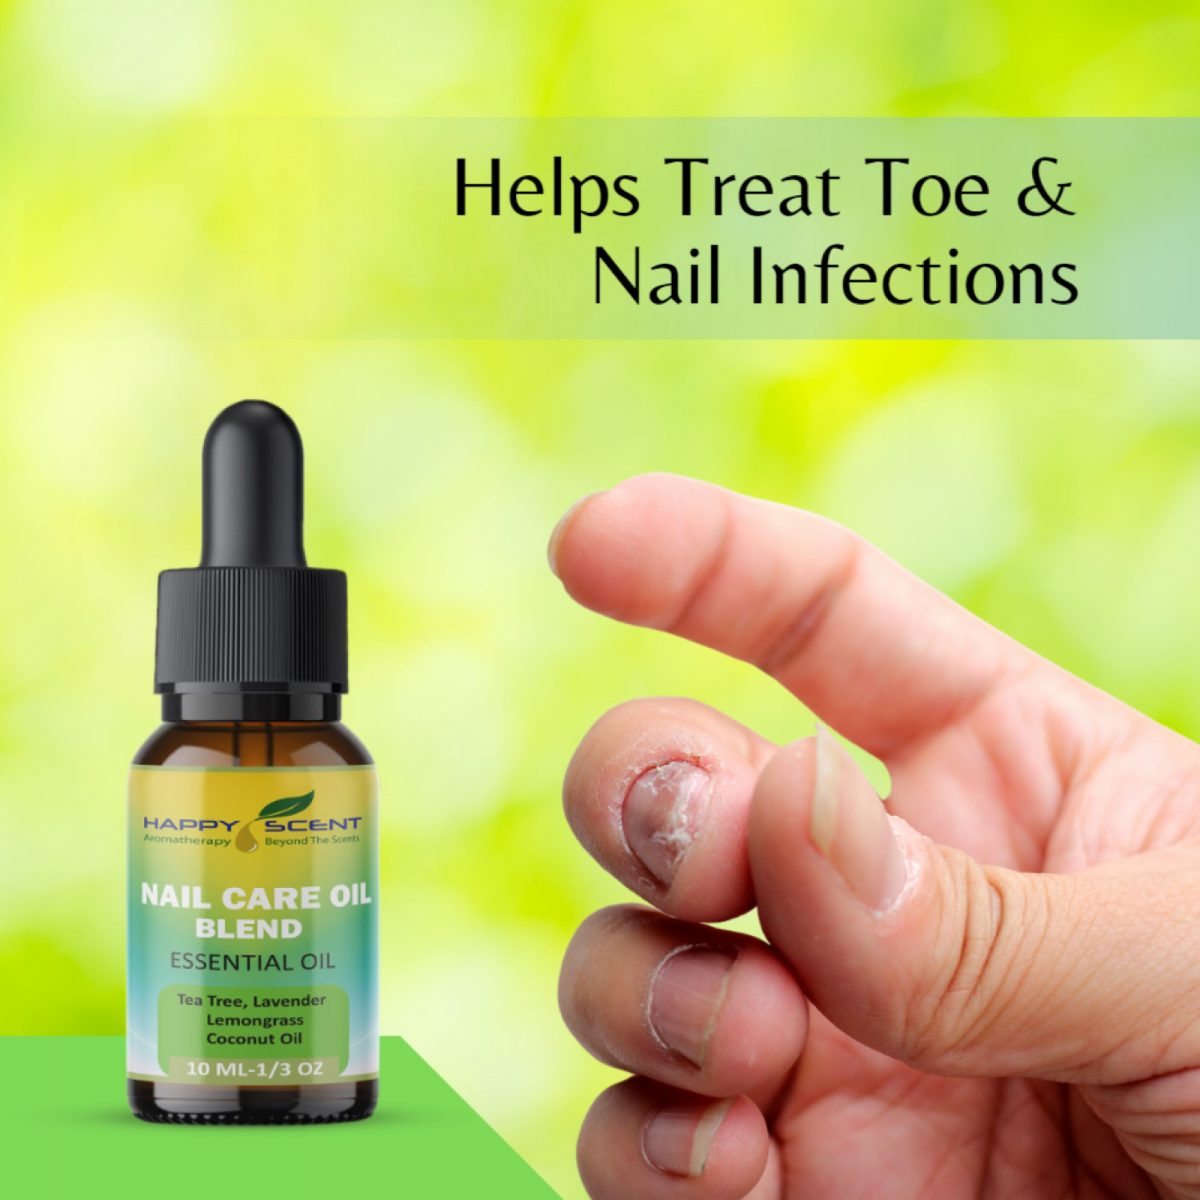 Buy TOE & NAIL CARE BLEND Oil, Fungal Infections, Nail Fungus Treatment, Healthy Nails, Natural Solution